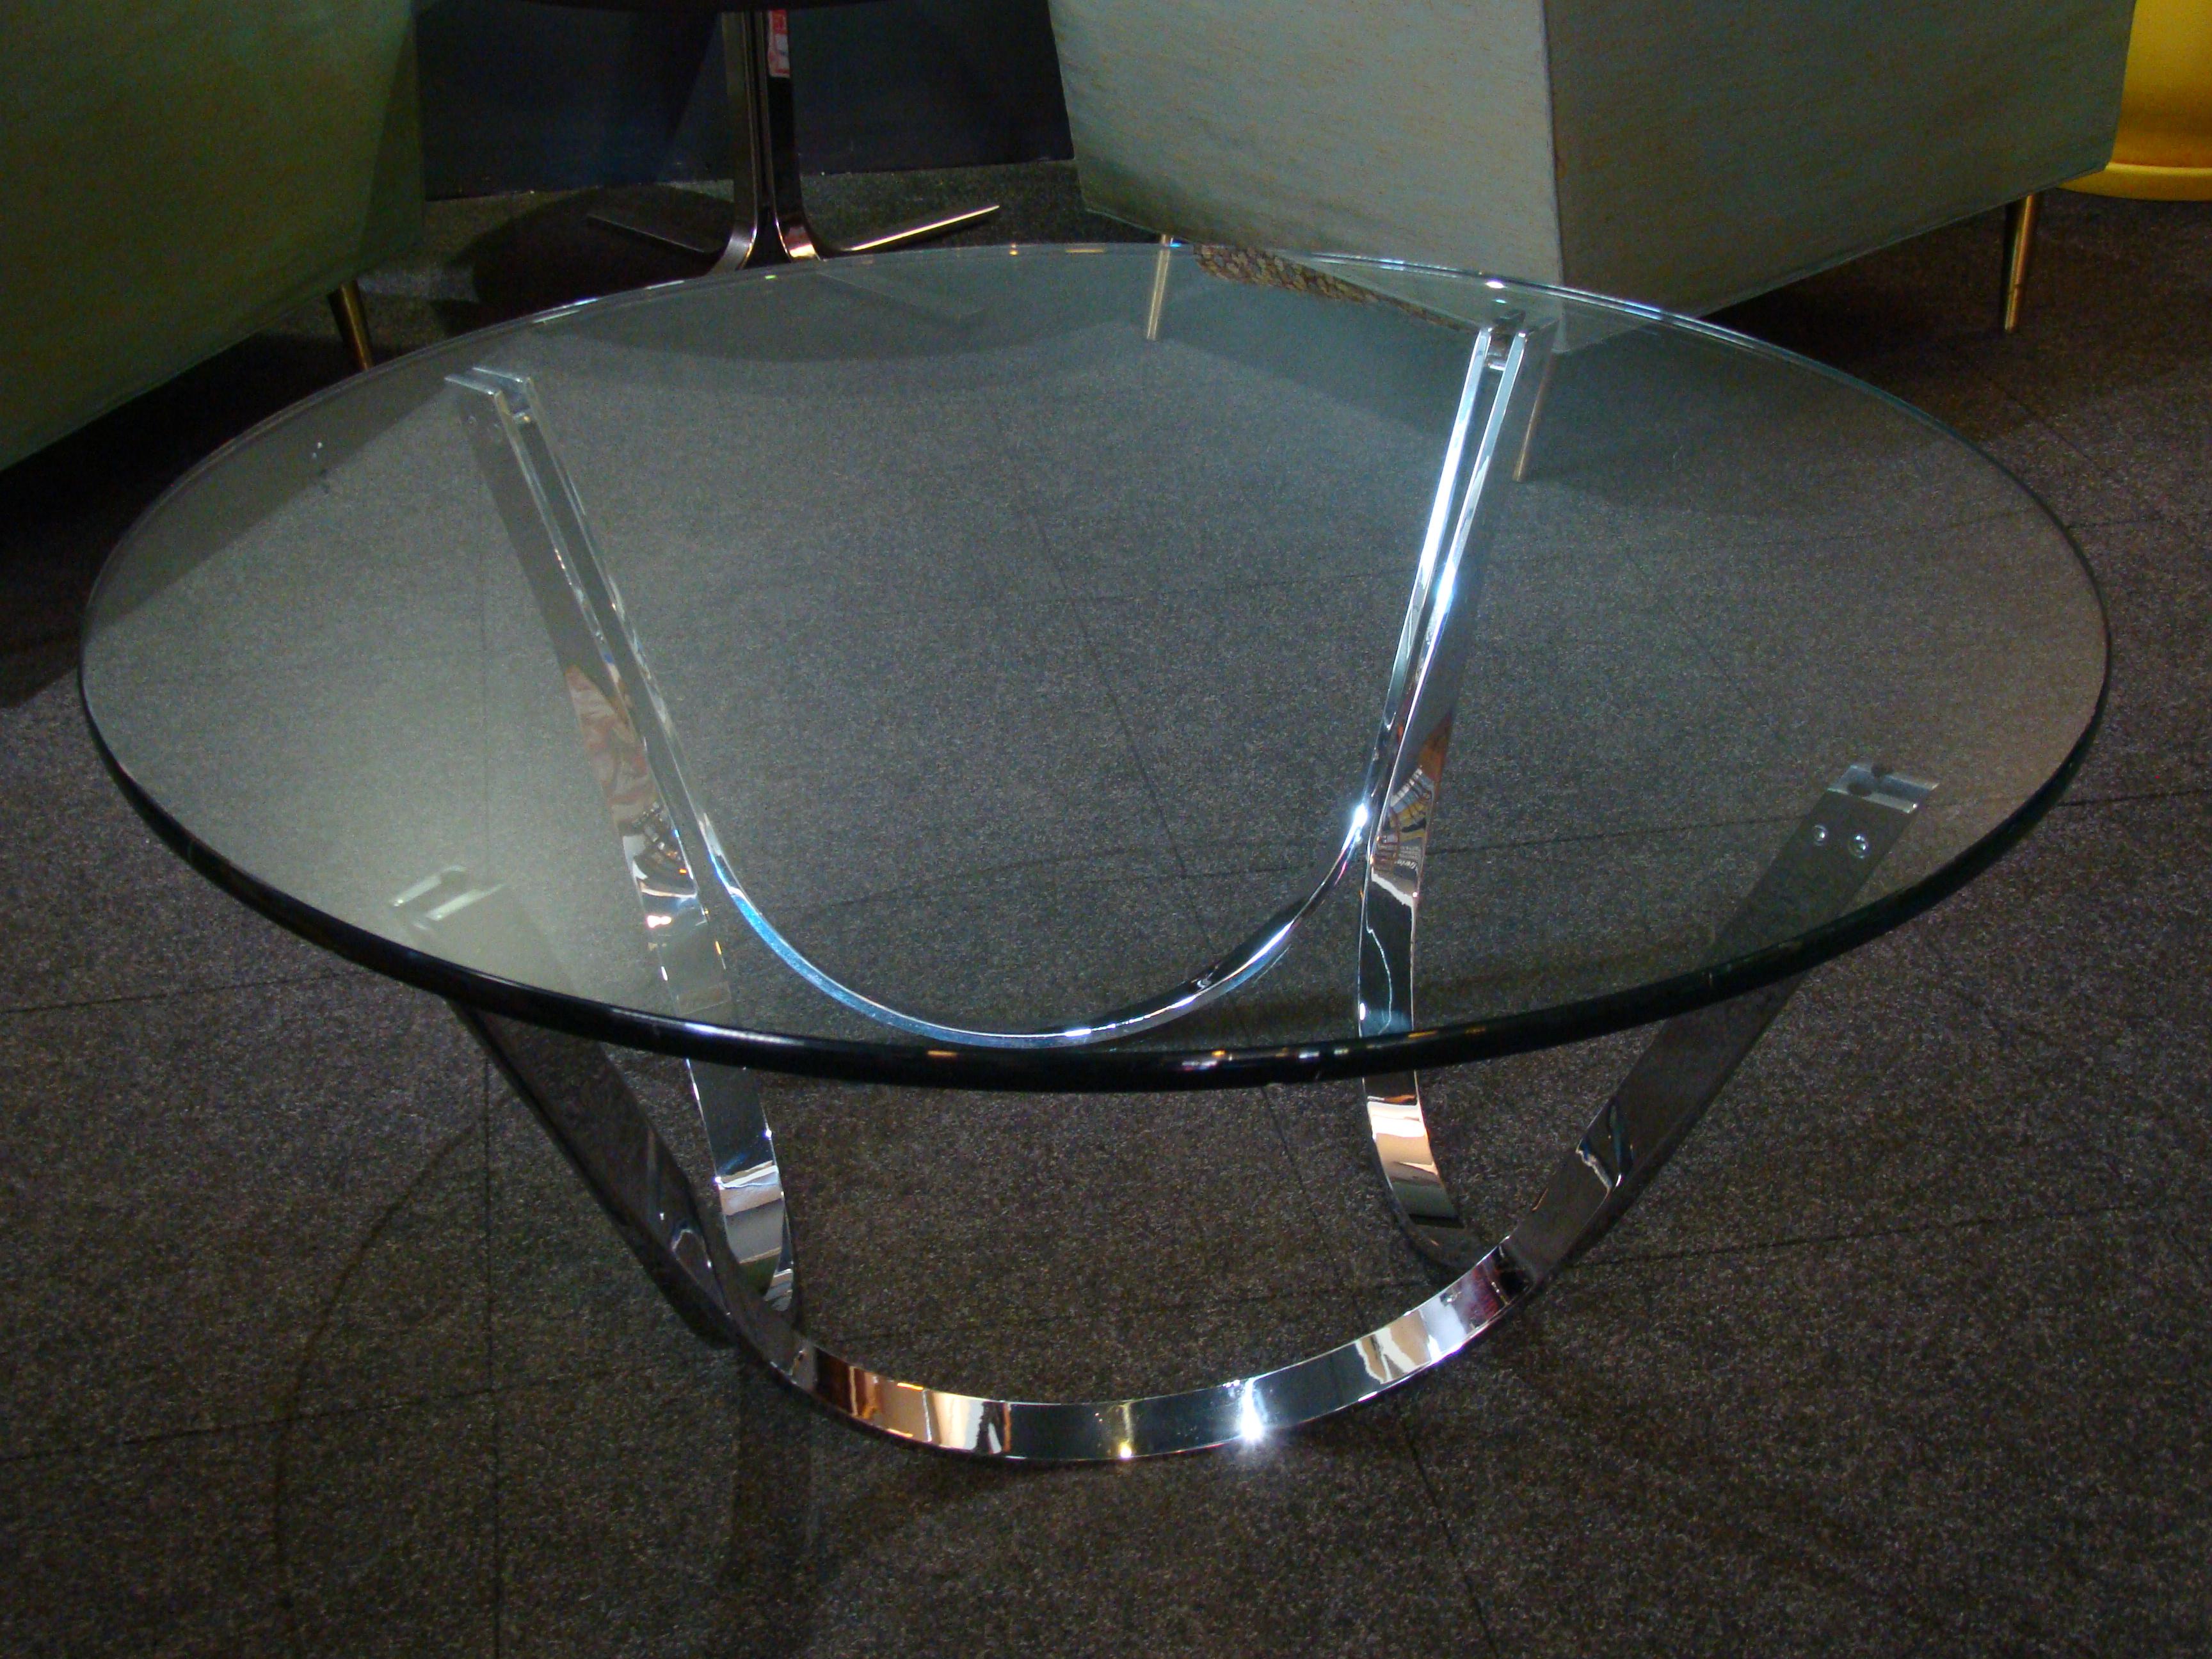 1970s chrome and glass cocktail table designed by Roger Sprunger for Dunbar Furniture Co.
42